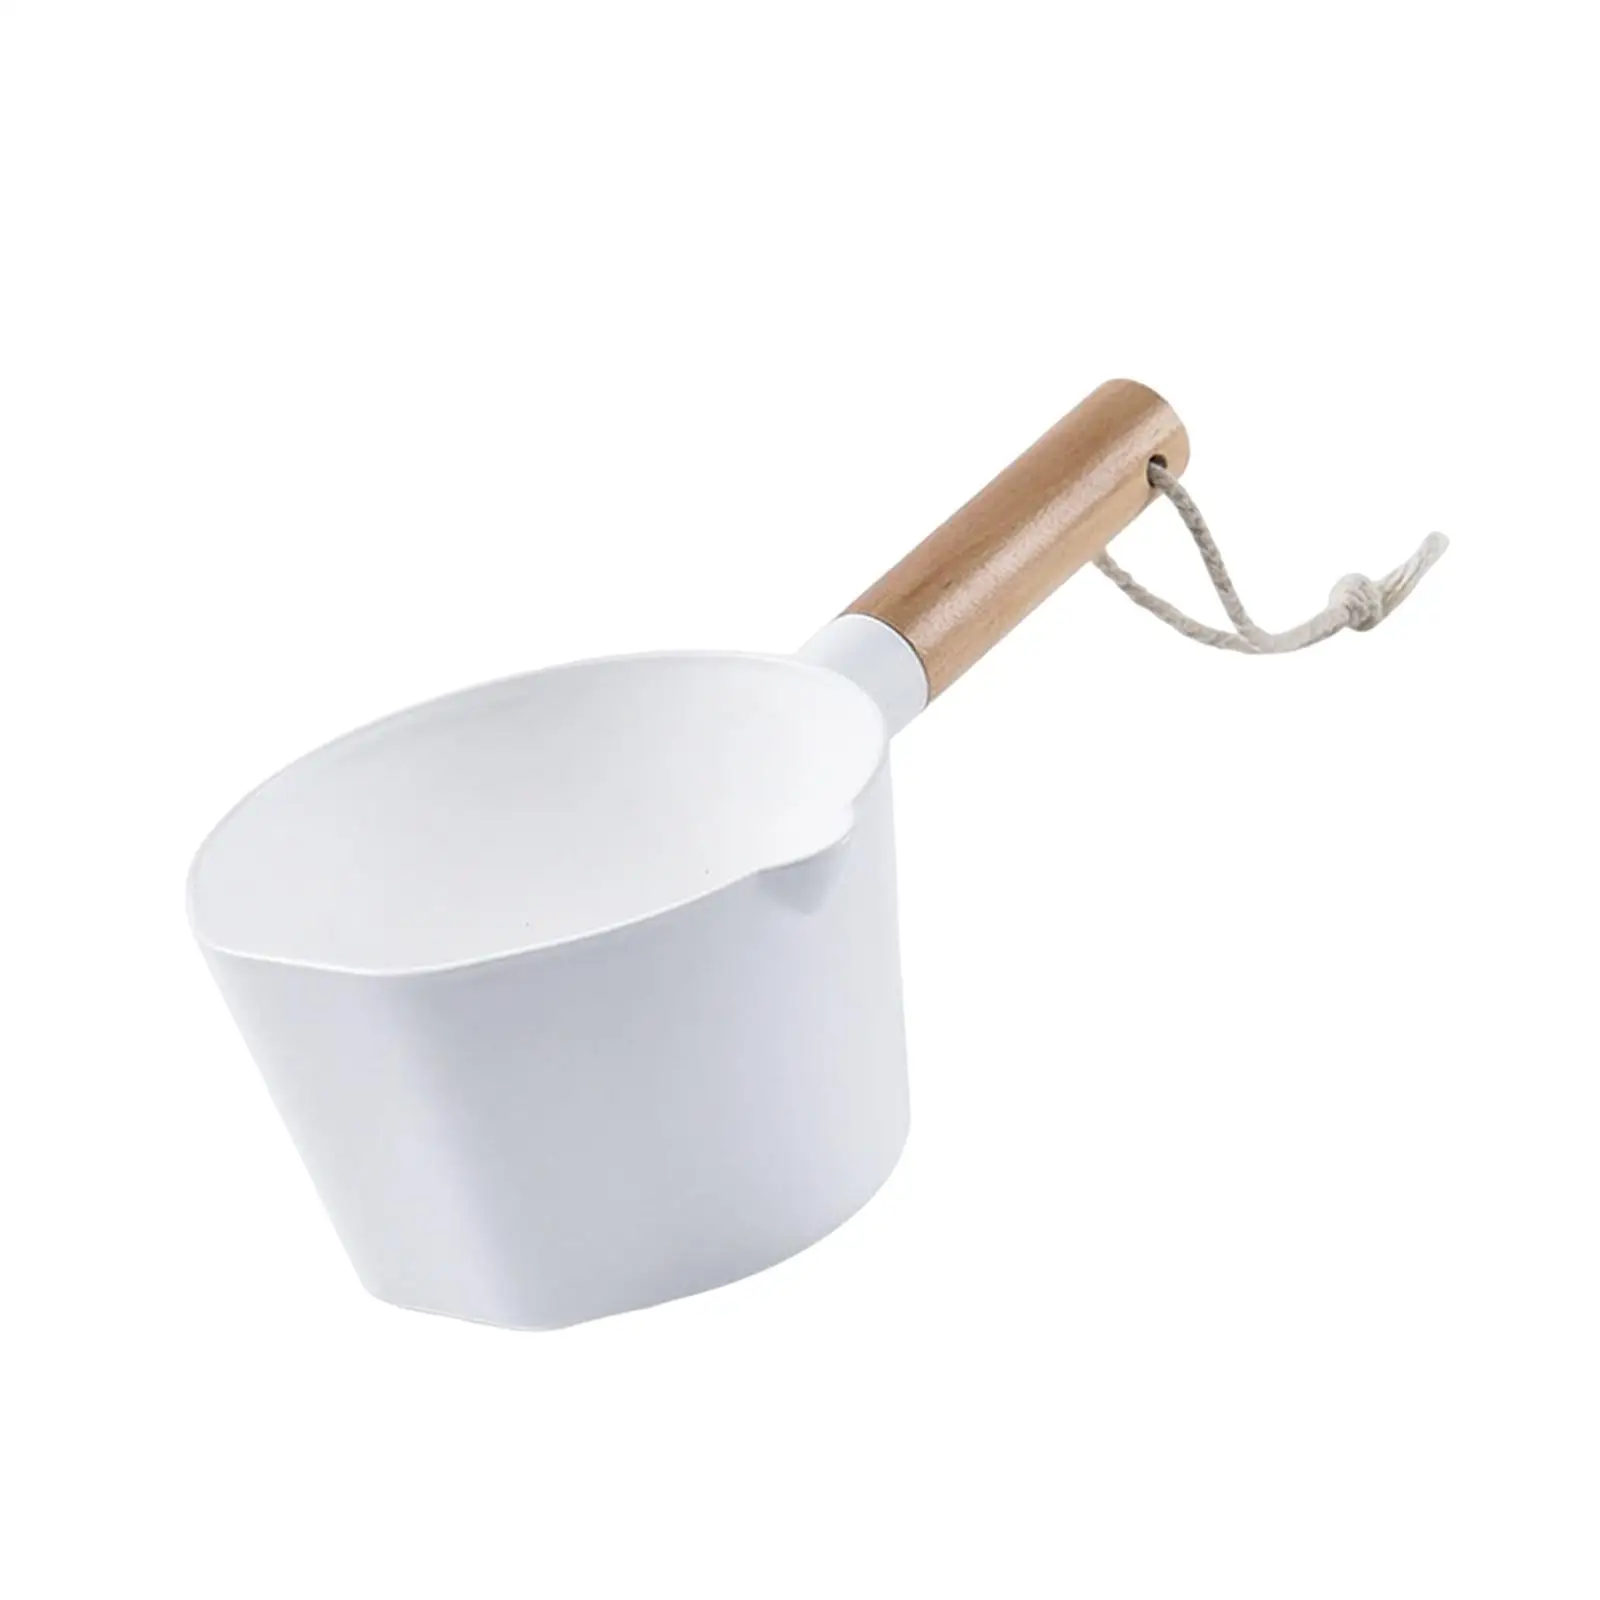 Long Handle Water Spoon Tableware Household Durable Gadget Hanging Cleaning Tool Water Ladle for Bath Shower Supplies